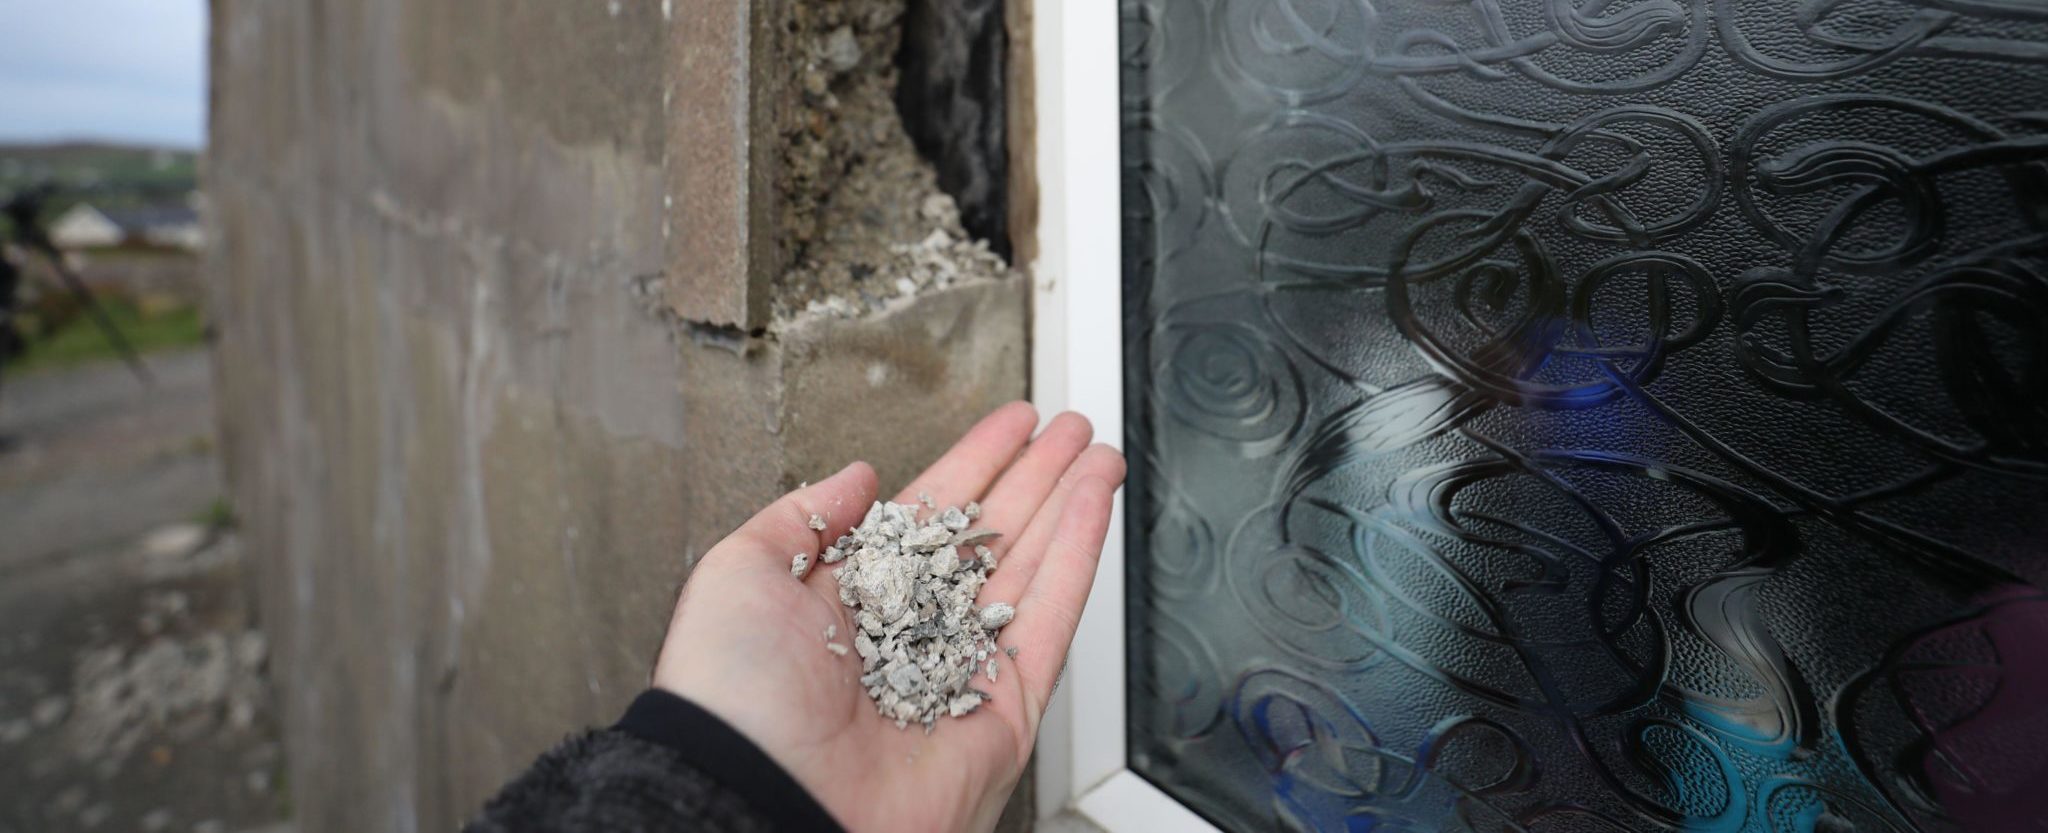 Structural damage is seen in the mica-affected home of Michael Glackin in Co Donegal, 7-10-21. 